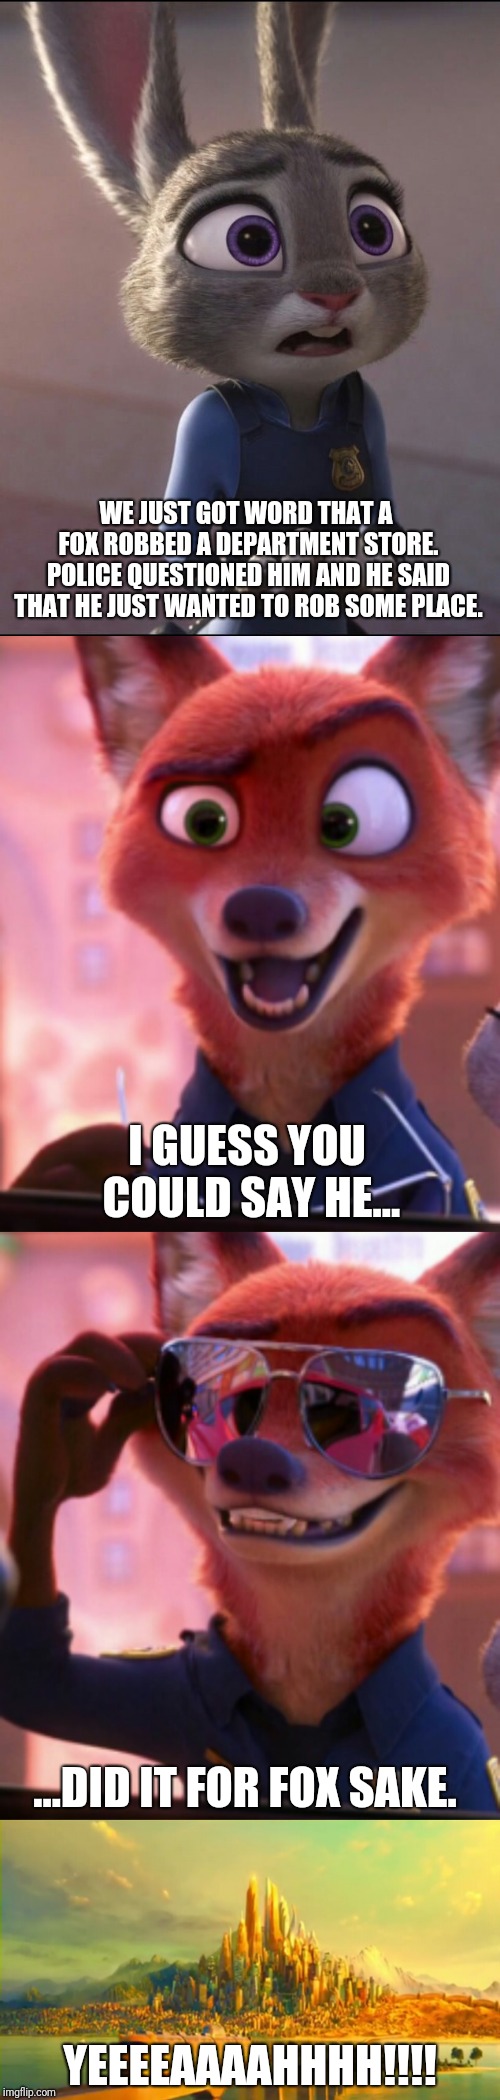 CSI: Zootopia 13 | WE JUST GOT WORD THAT A FOX ROBBED A DEPARTMENT STORE. POLICE QUESTIONED HIM AND HE SAID THAT HE JUST WANTED TO ROB SOME PLACE. I GUESS YOU COULD SAY HE... ...DID IT FOR FOX SAKE. YEEEEAAAAHHHH!!!! | image tagged in zootopia,judy hopps,nick wilde,csi,parody,funny | made w/ Imgflip meme maker